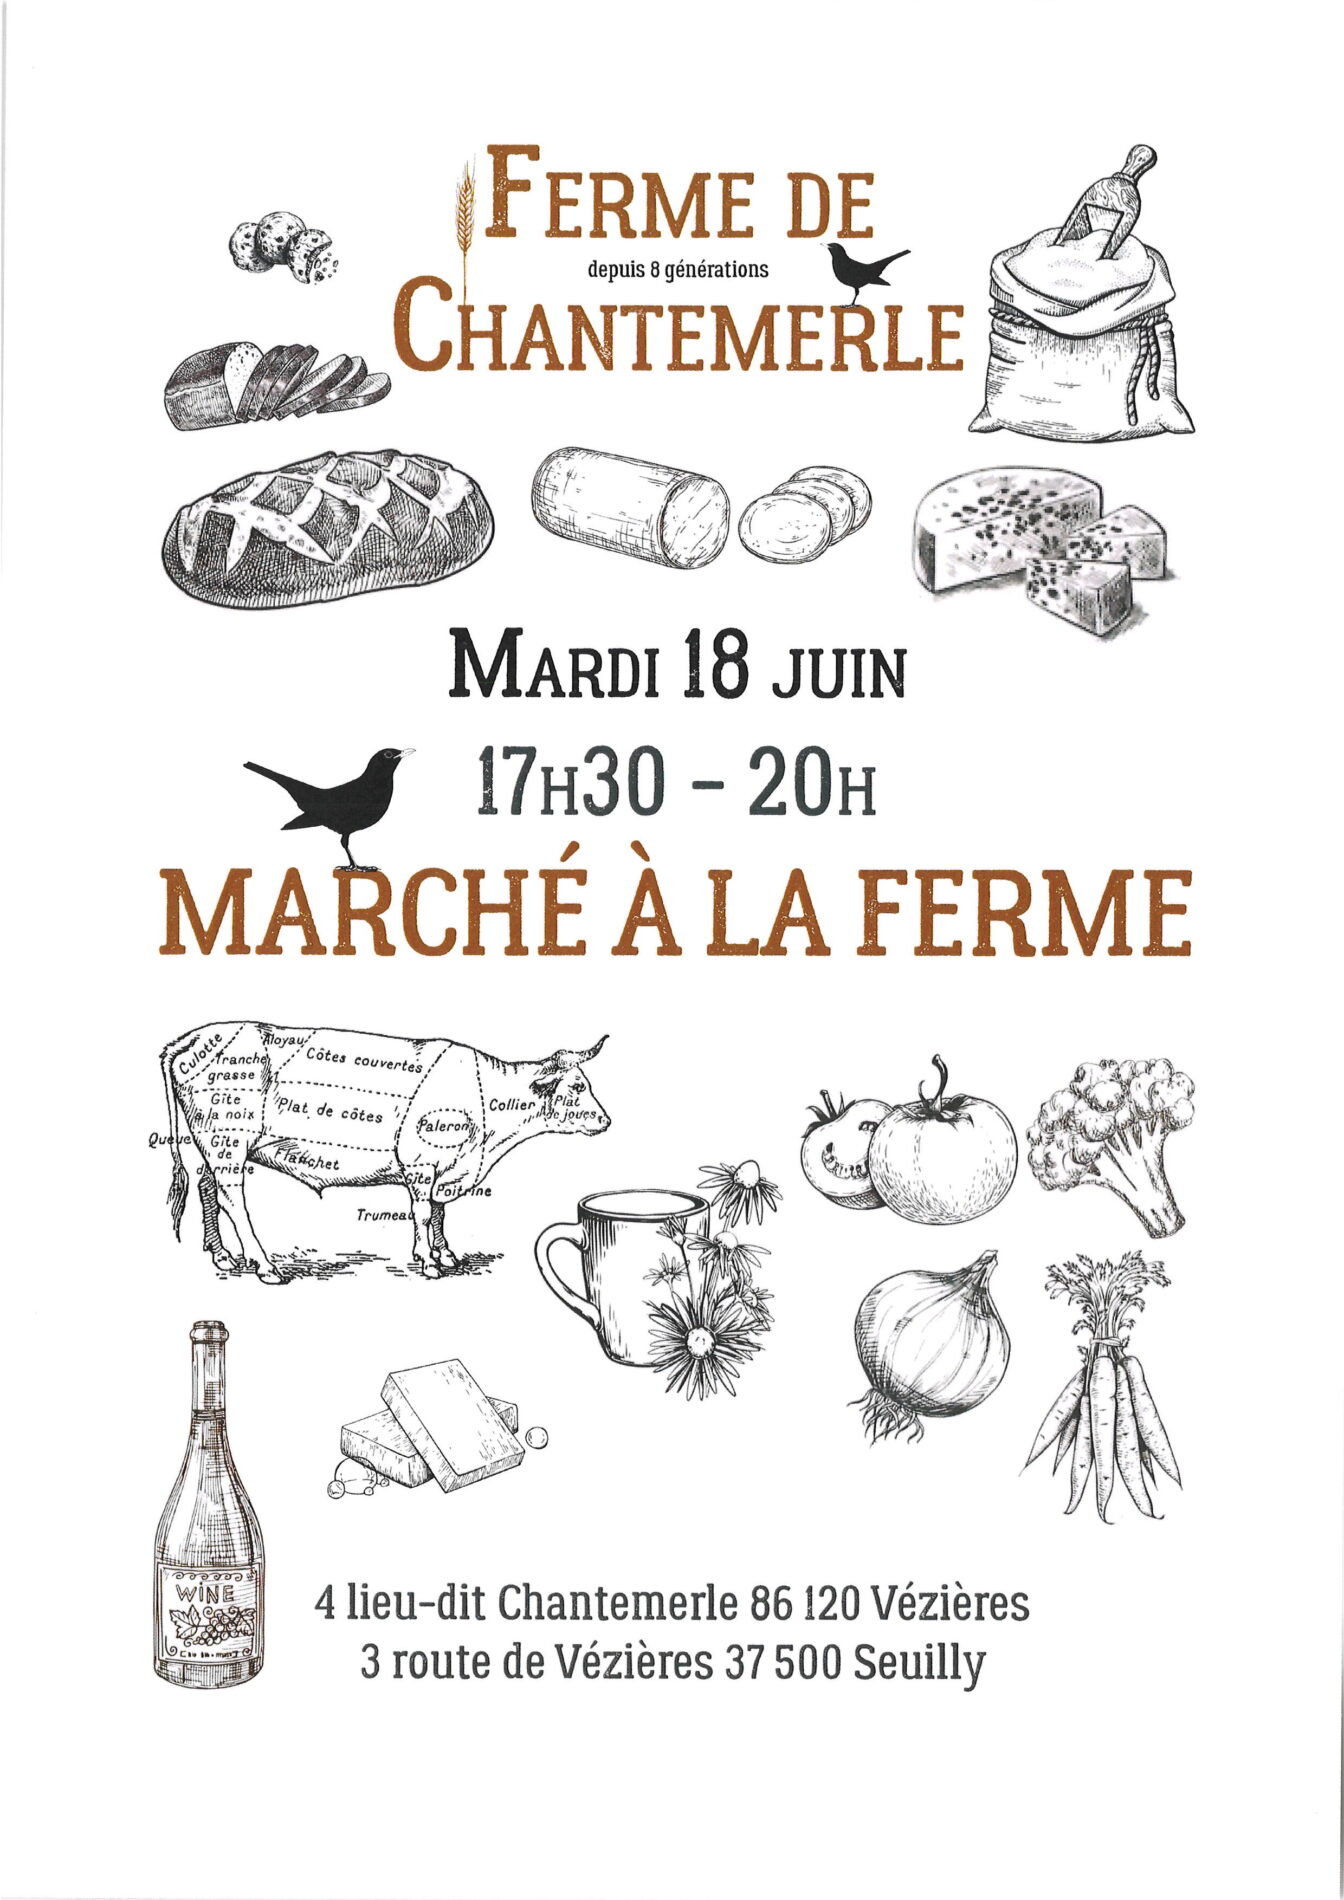 You are currently viewing FERME DE CHANTEMERLE